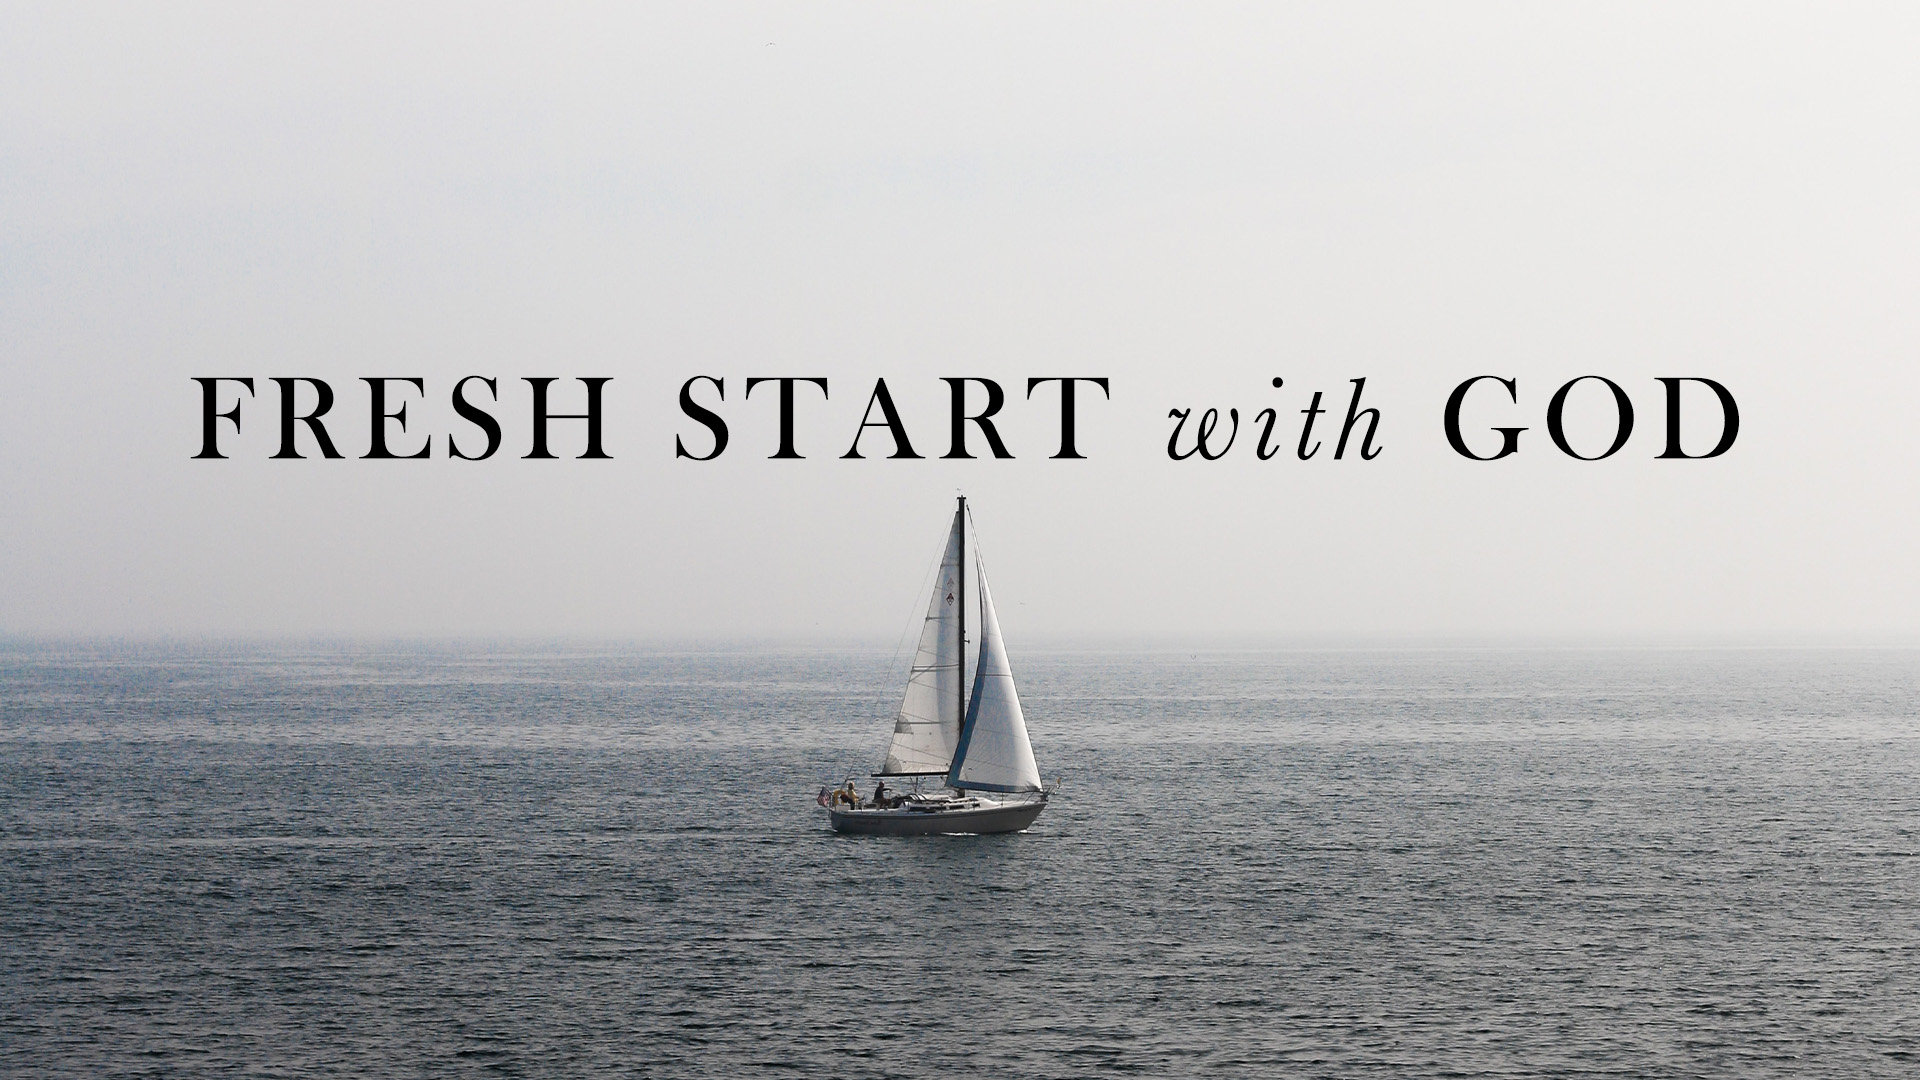 Fresh Start with God

Sunday | 9:00am
May 29th
June 26th
